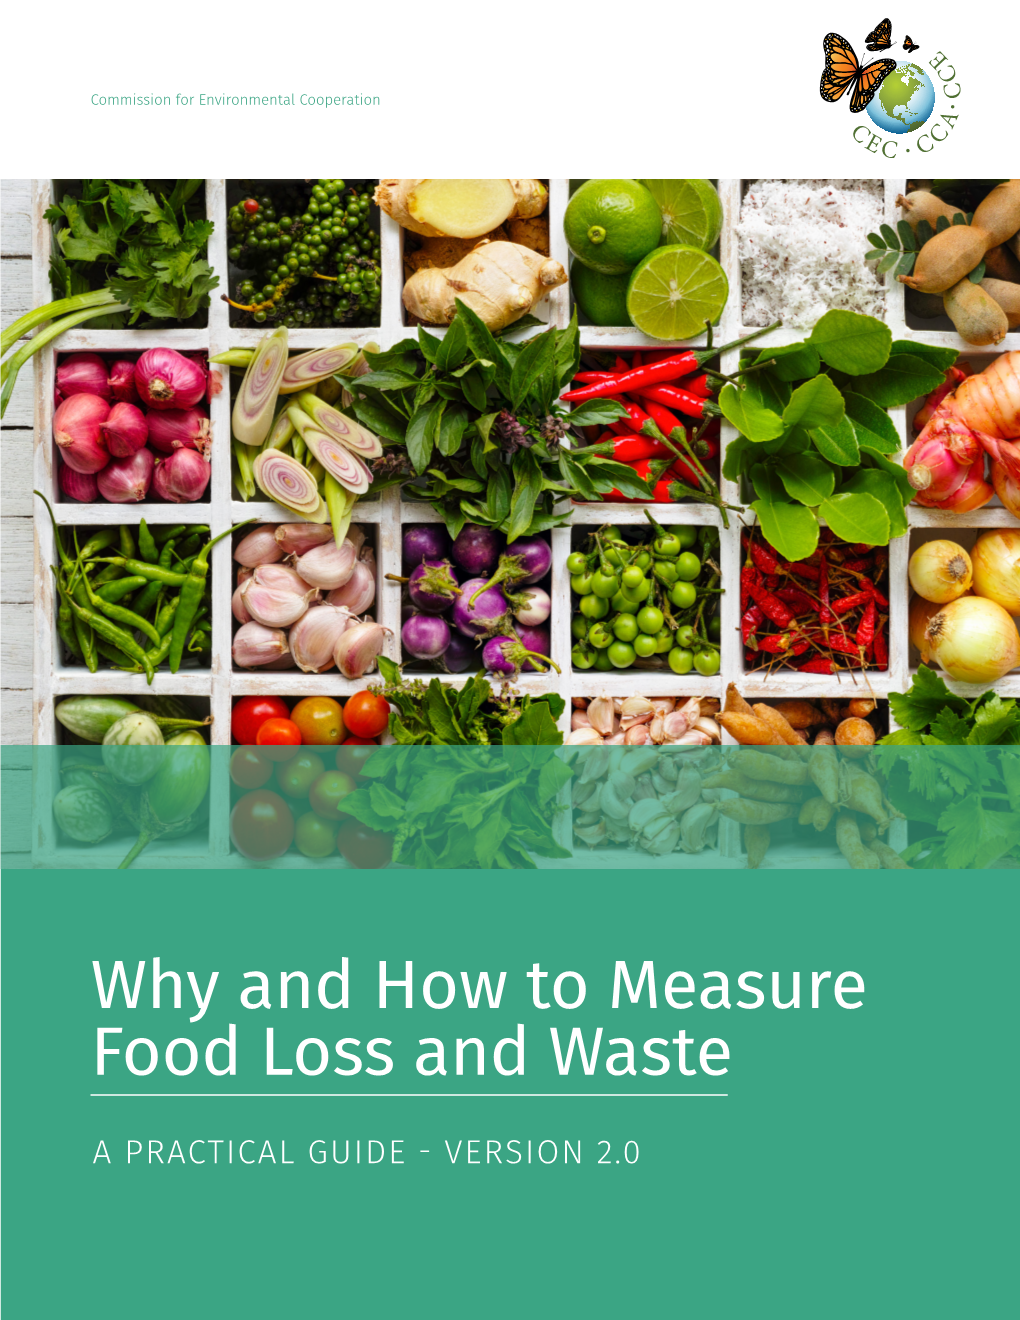 Why and How to Measure Food Loss and Waste